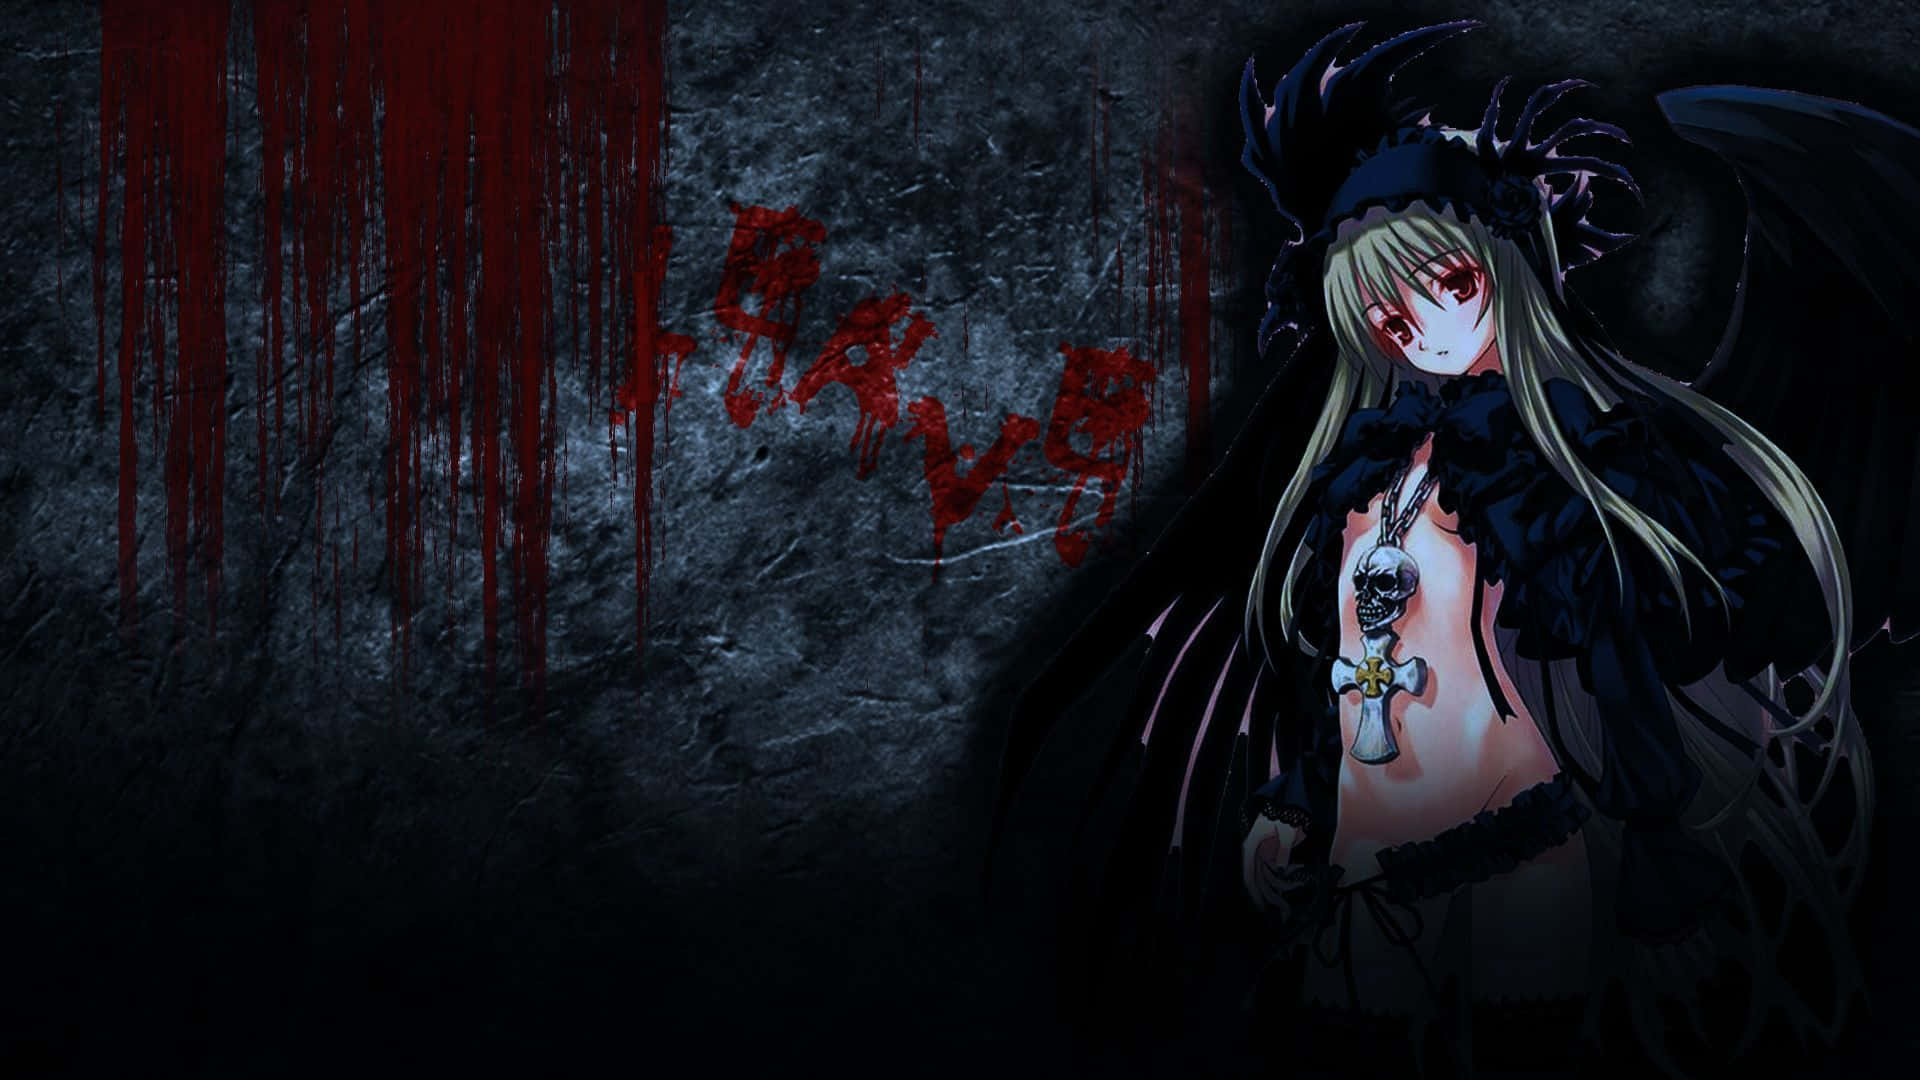 Intense Black and Red Anime Wallpaper